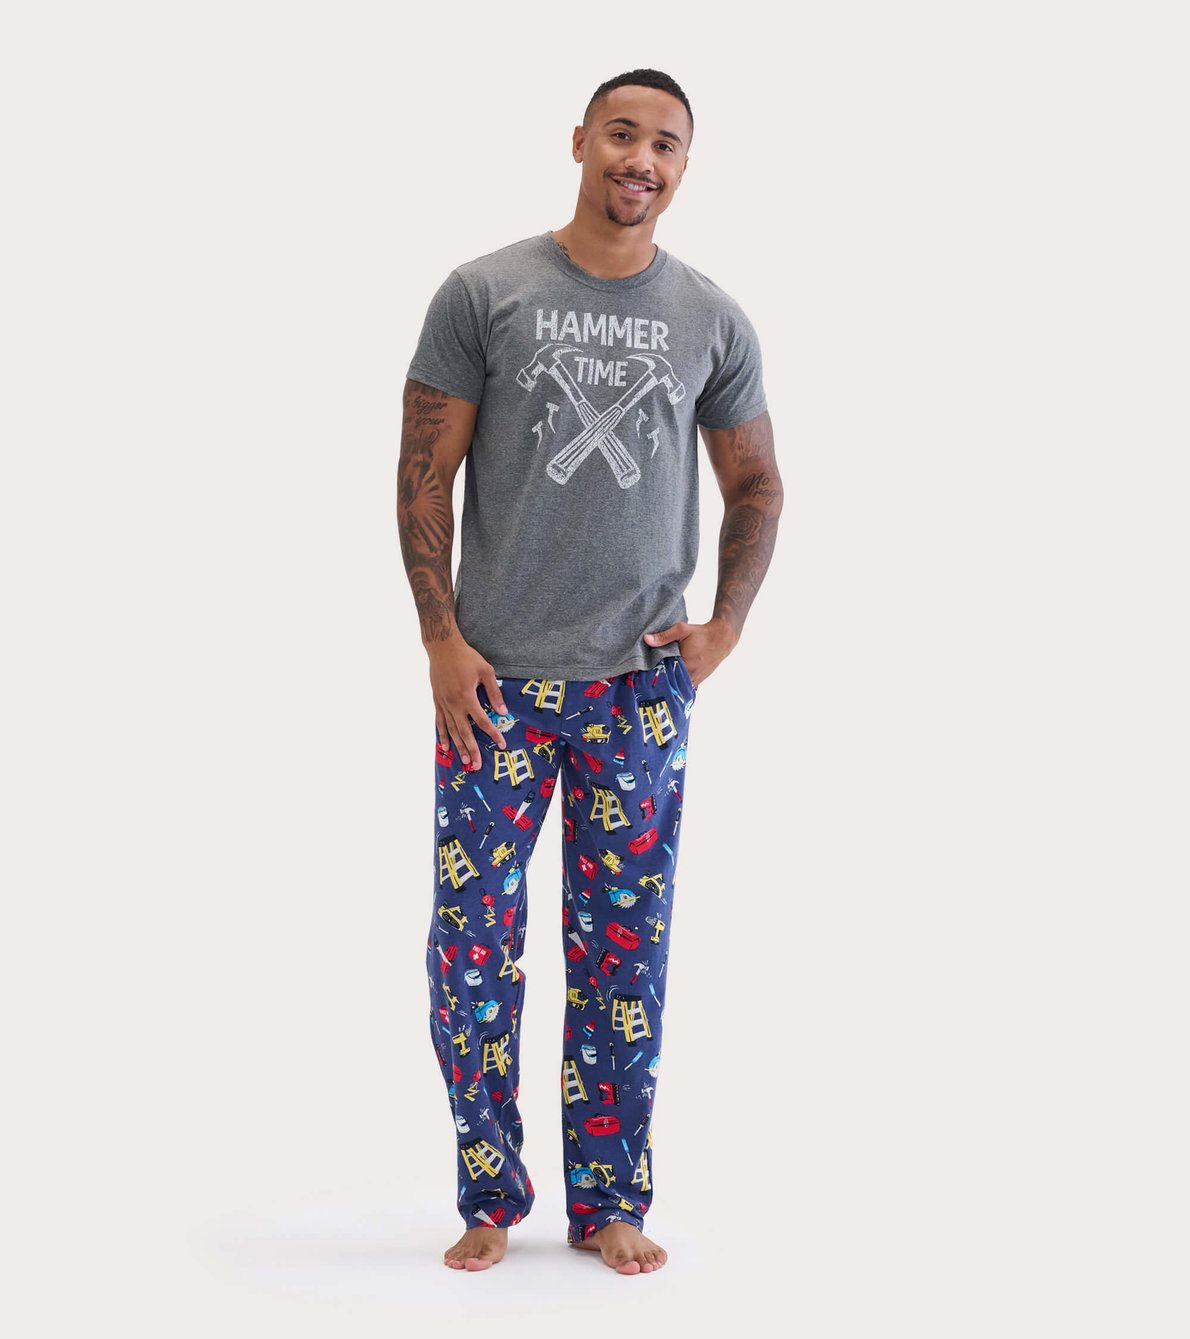 View larger image of Hammer Time Men's Tee and Pants Pajama Separates